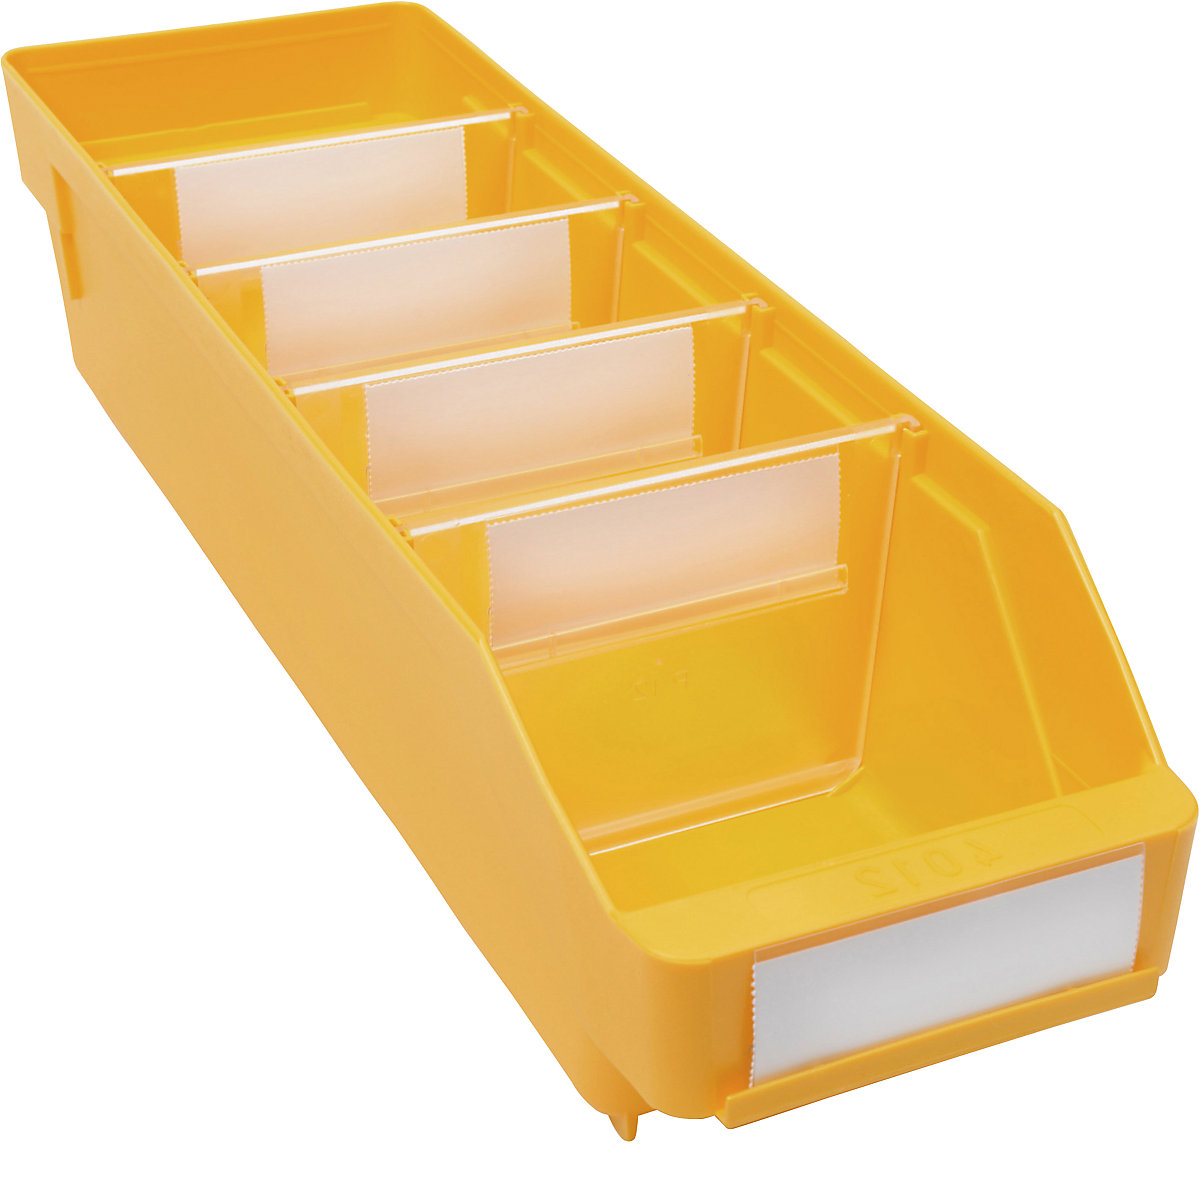 Shelf bin made of highly impact resistant polypropylene – STEMO, yellow, LxWxH 400 x 118 x 95 mm, pack of 30-20